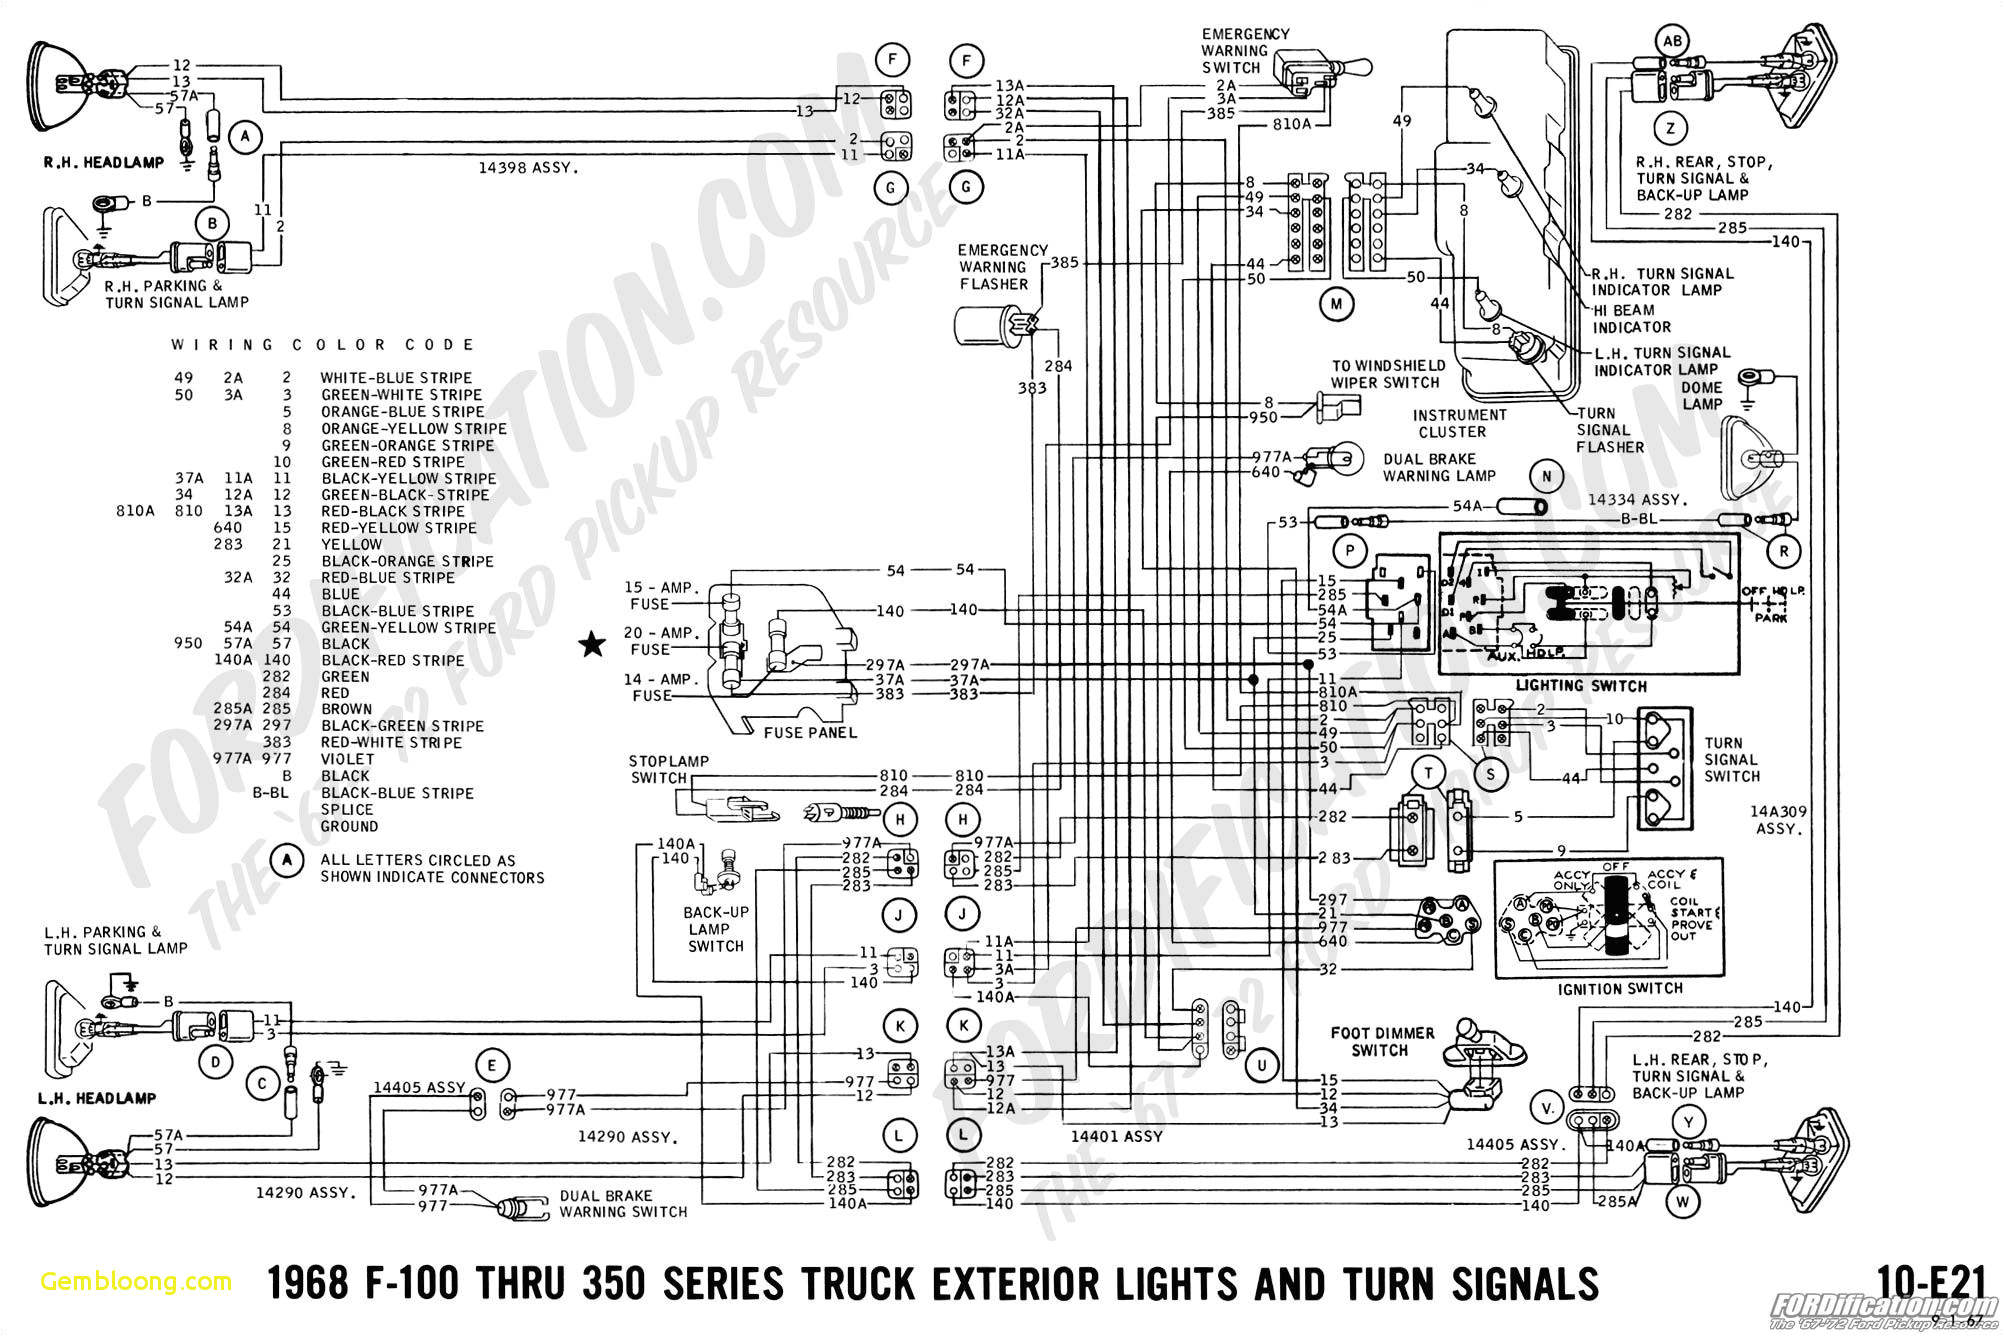 download ford trucks wiring diagrams ford truck wiring diagrams simplified shapes ford f150 wiring of ford trucks wiring diagrams jpg